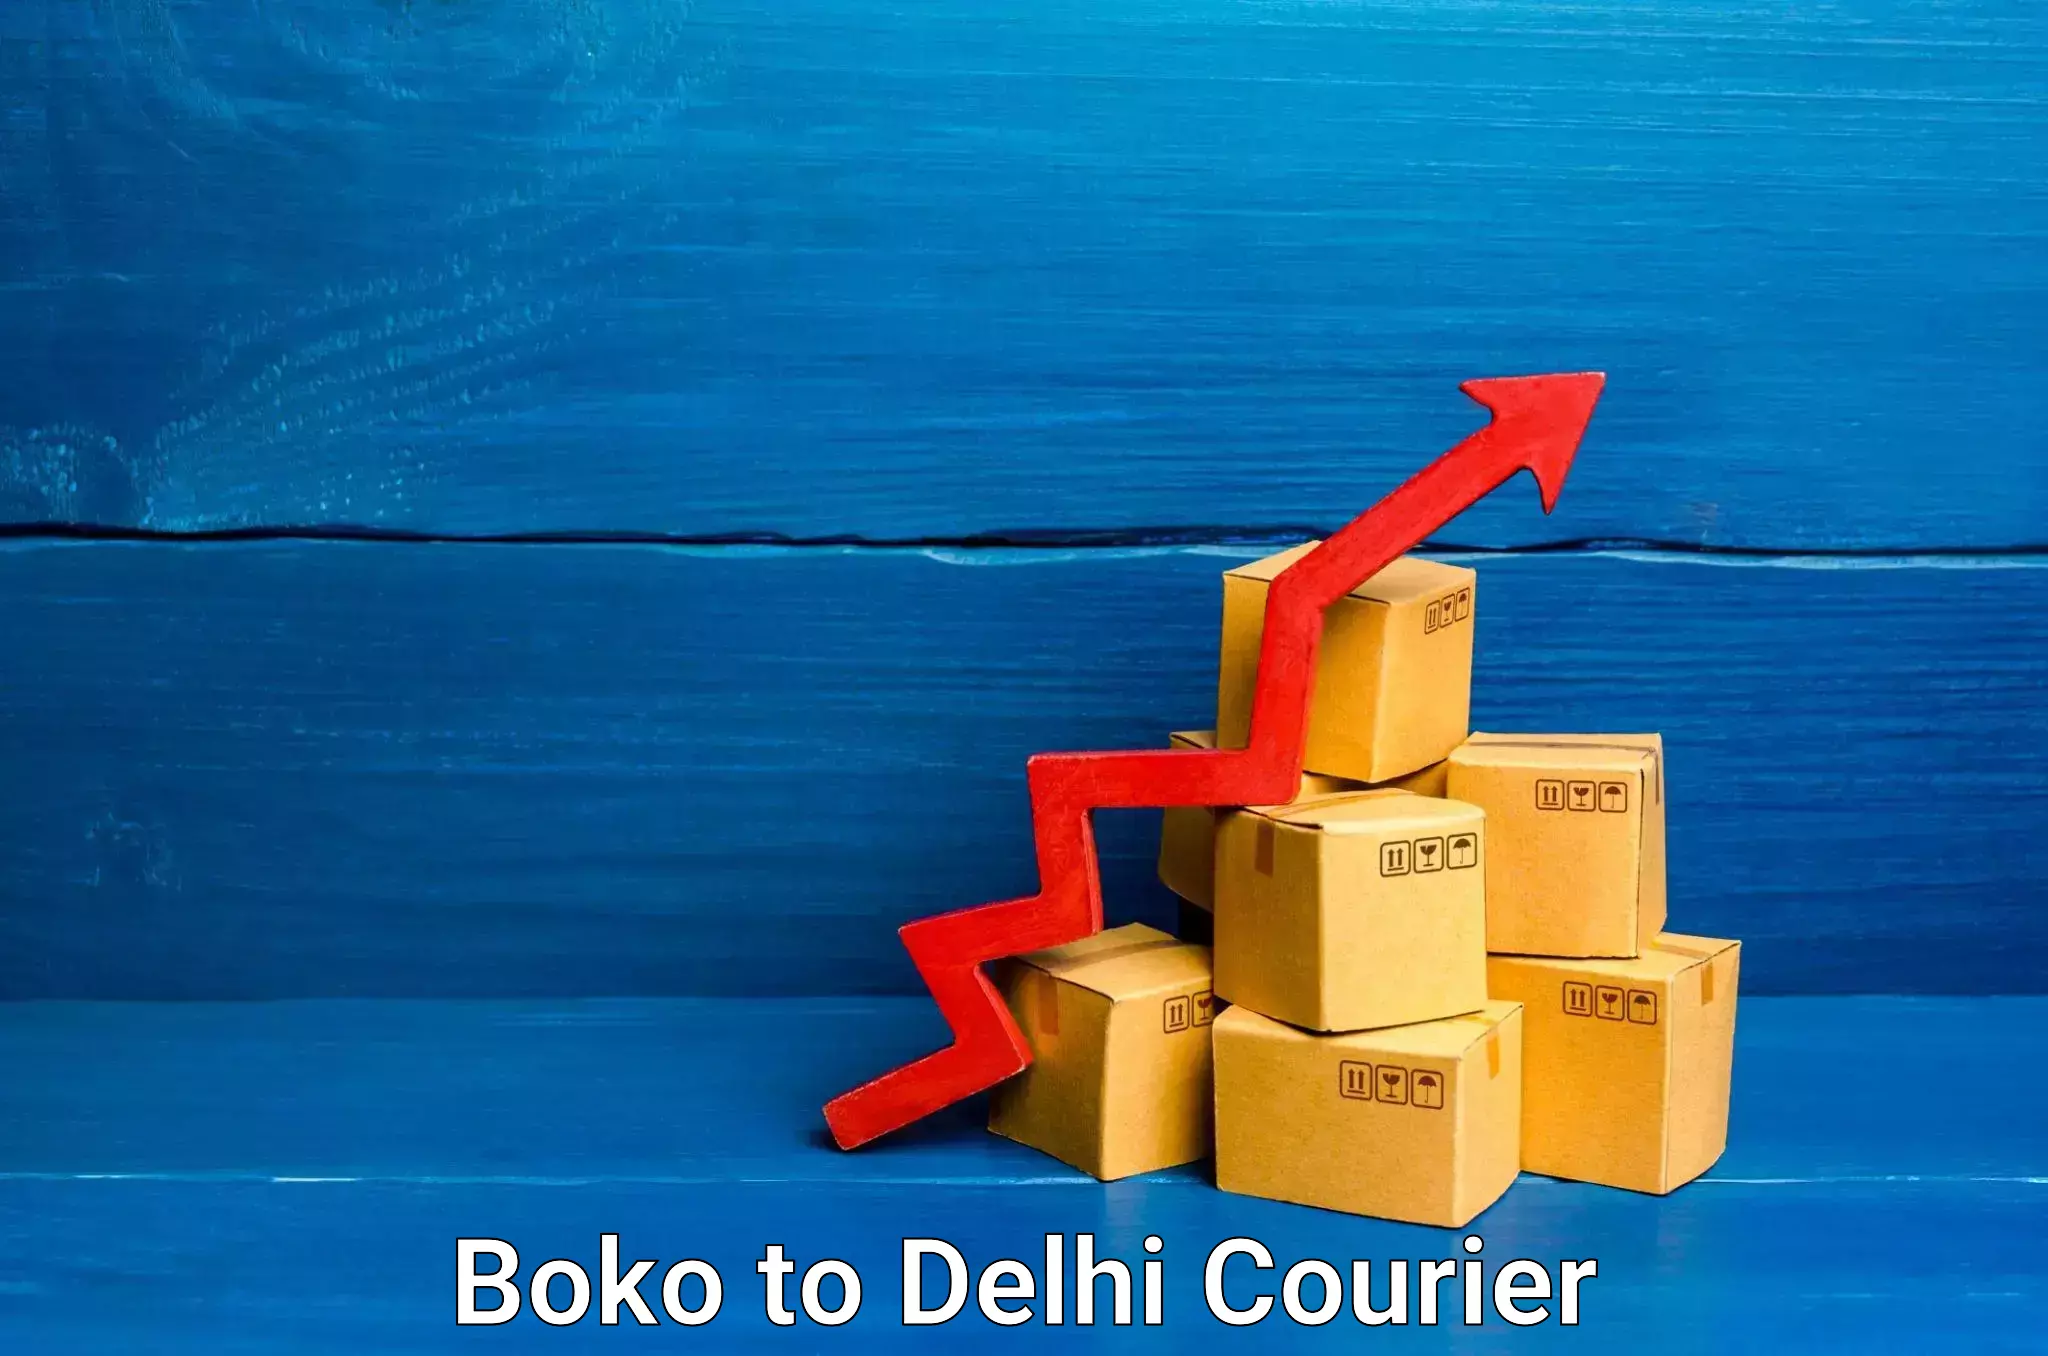 Package delivery network Boko to Delhi